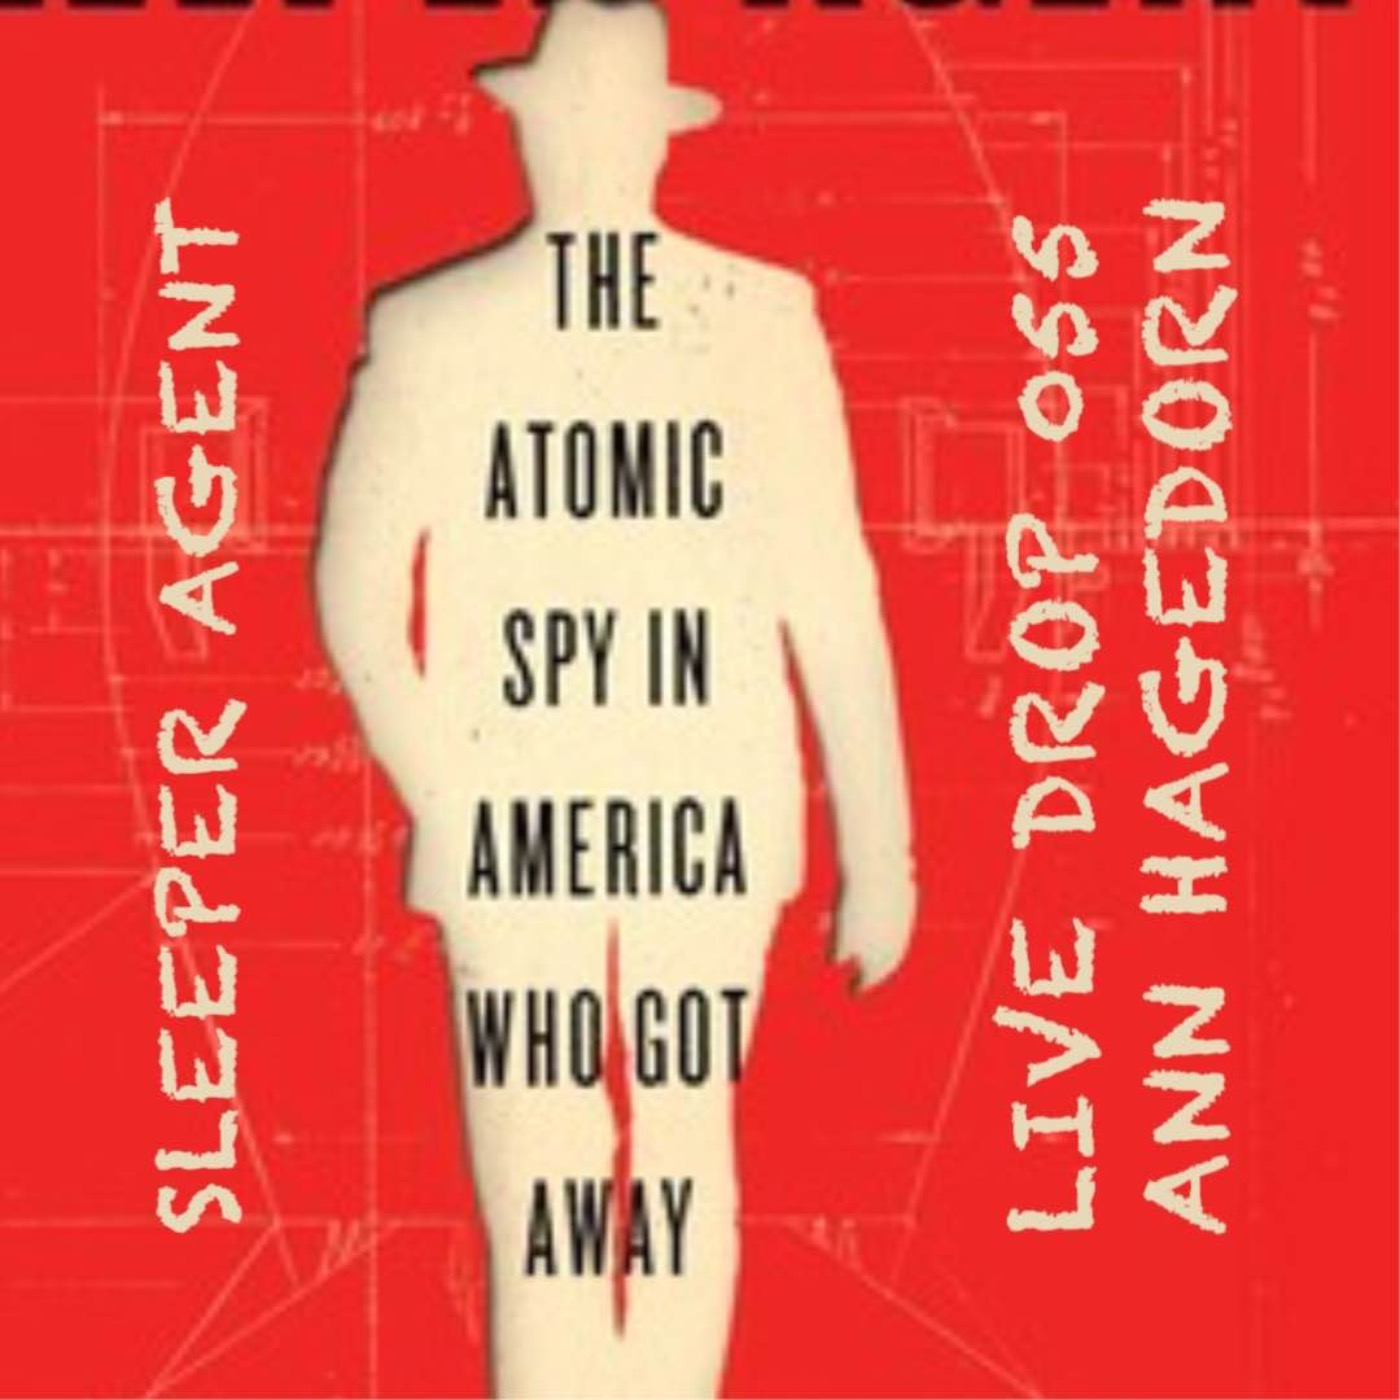 George Koval Discussion: The Atomic Spy Who Got Away